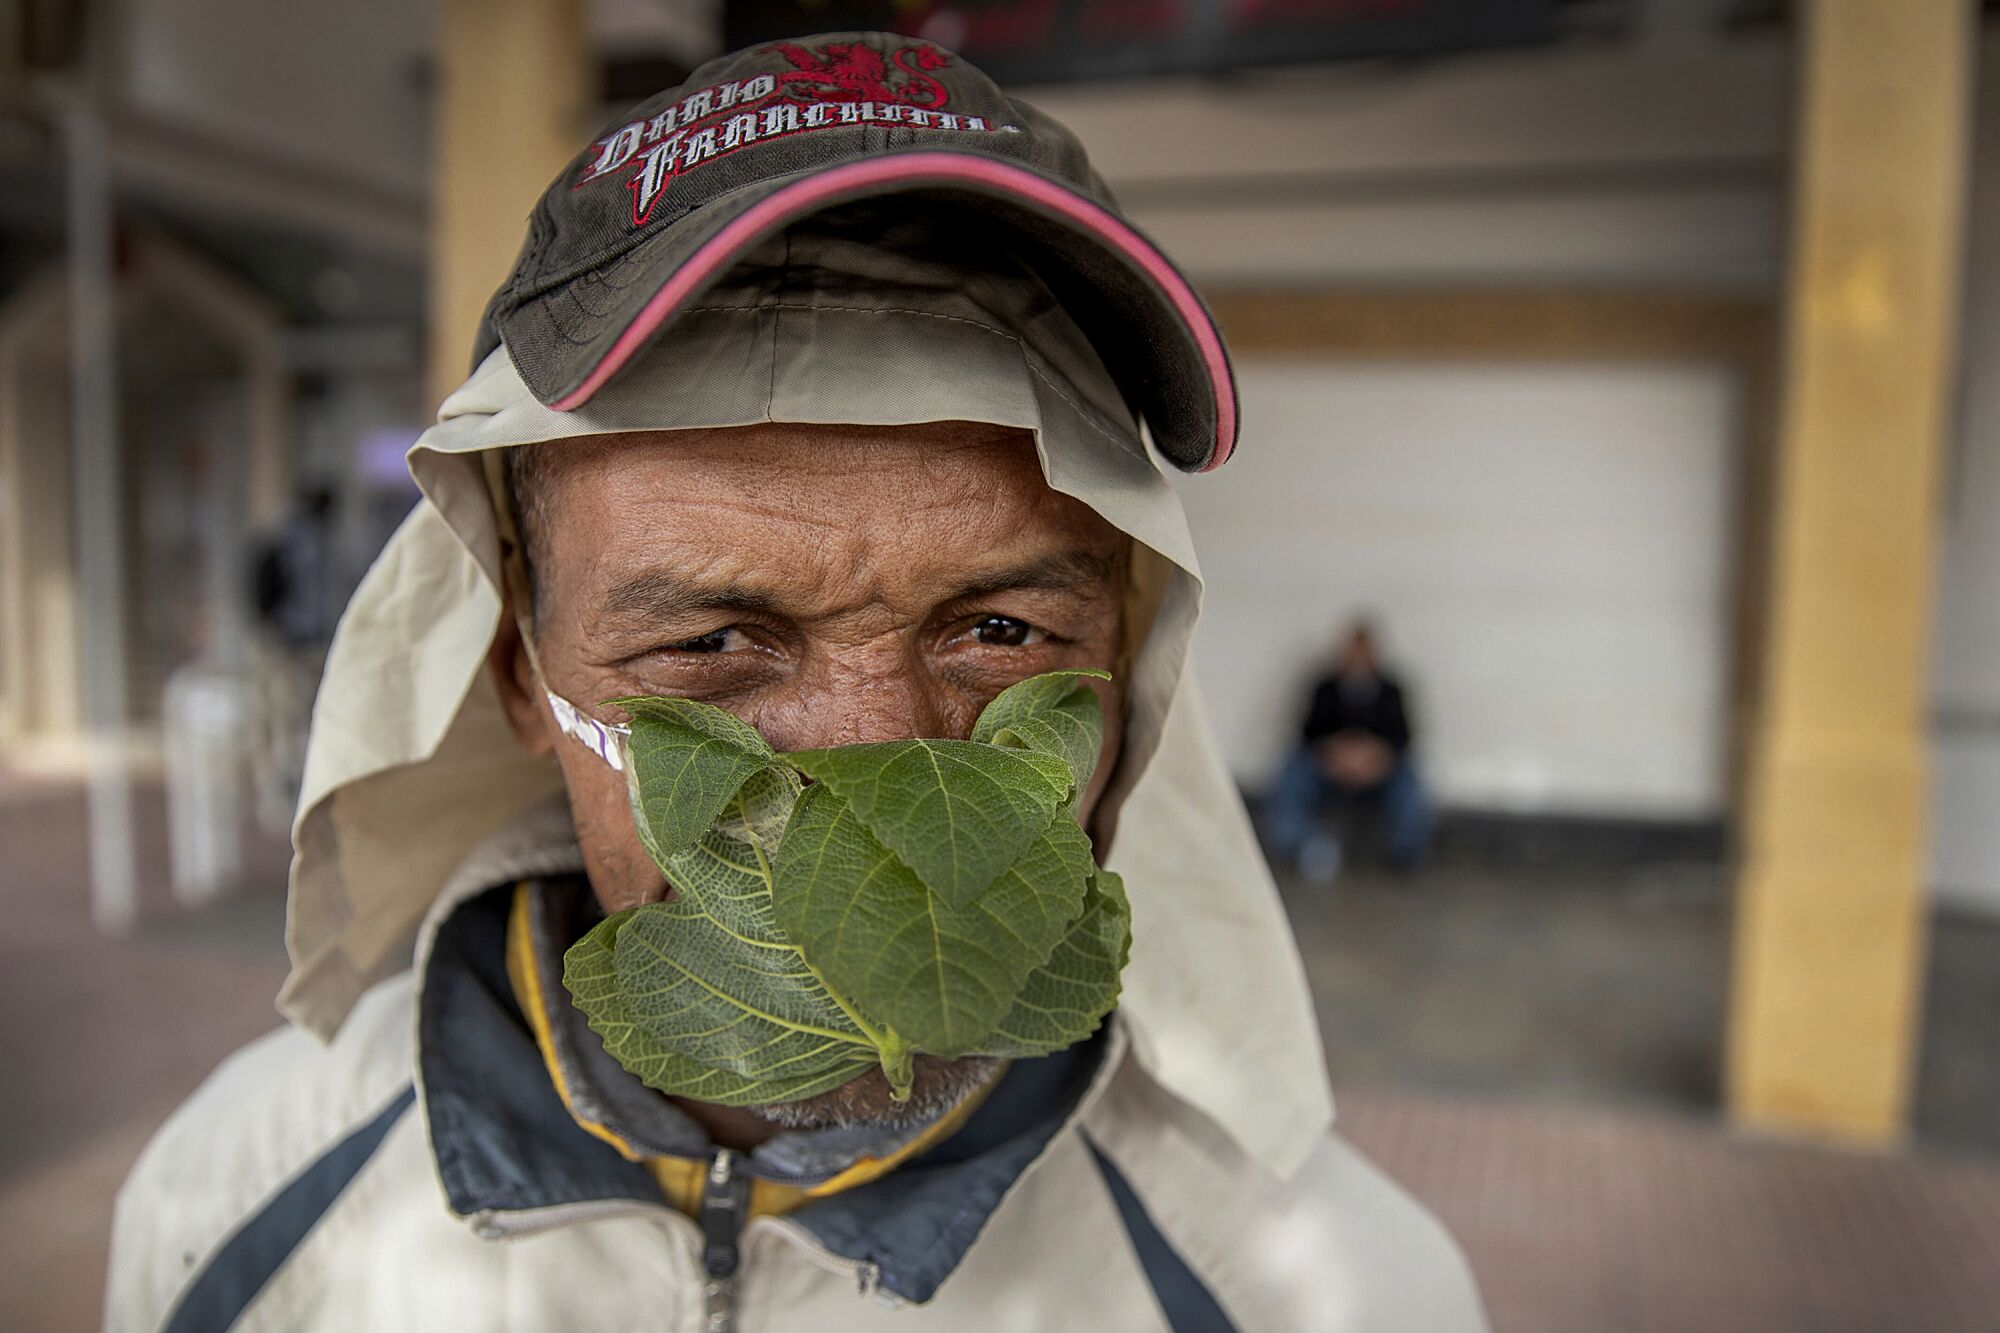 MOROCCO: A 55-year-old street vendor named Abderrahim poses for a portrait while wearing a mask made of fig leaves in Rabat.